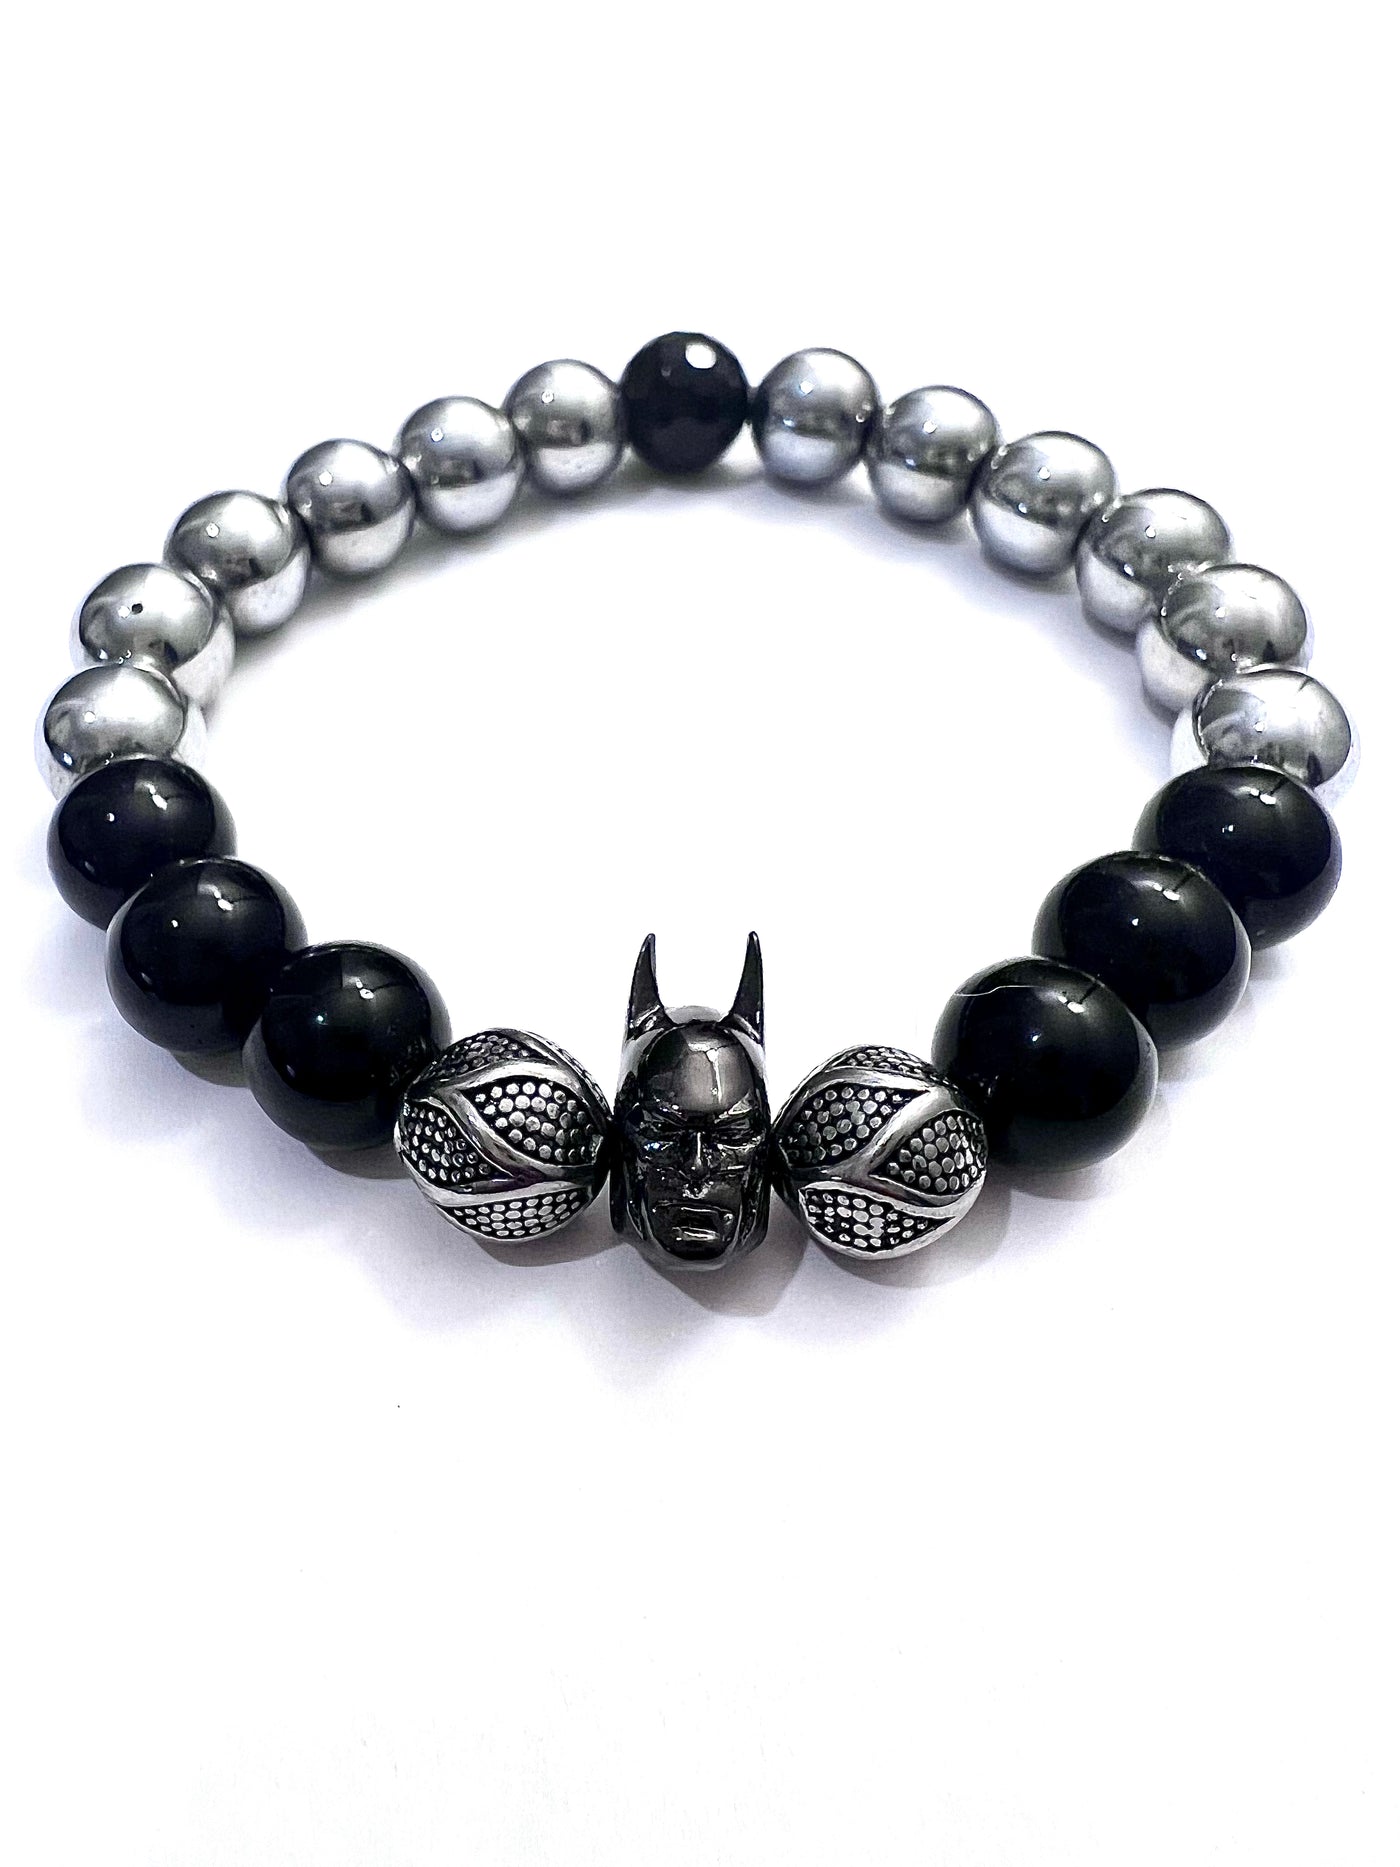 Batman head with Onyx and Silver beads and stainless steel spacer beads - Brent's Bling